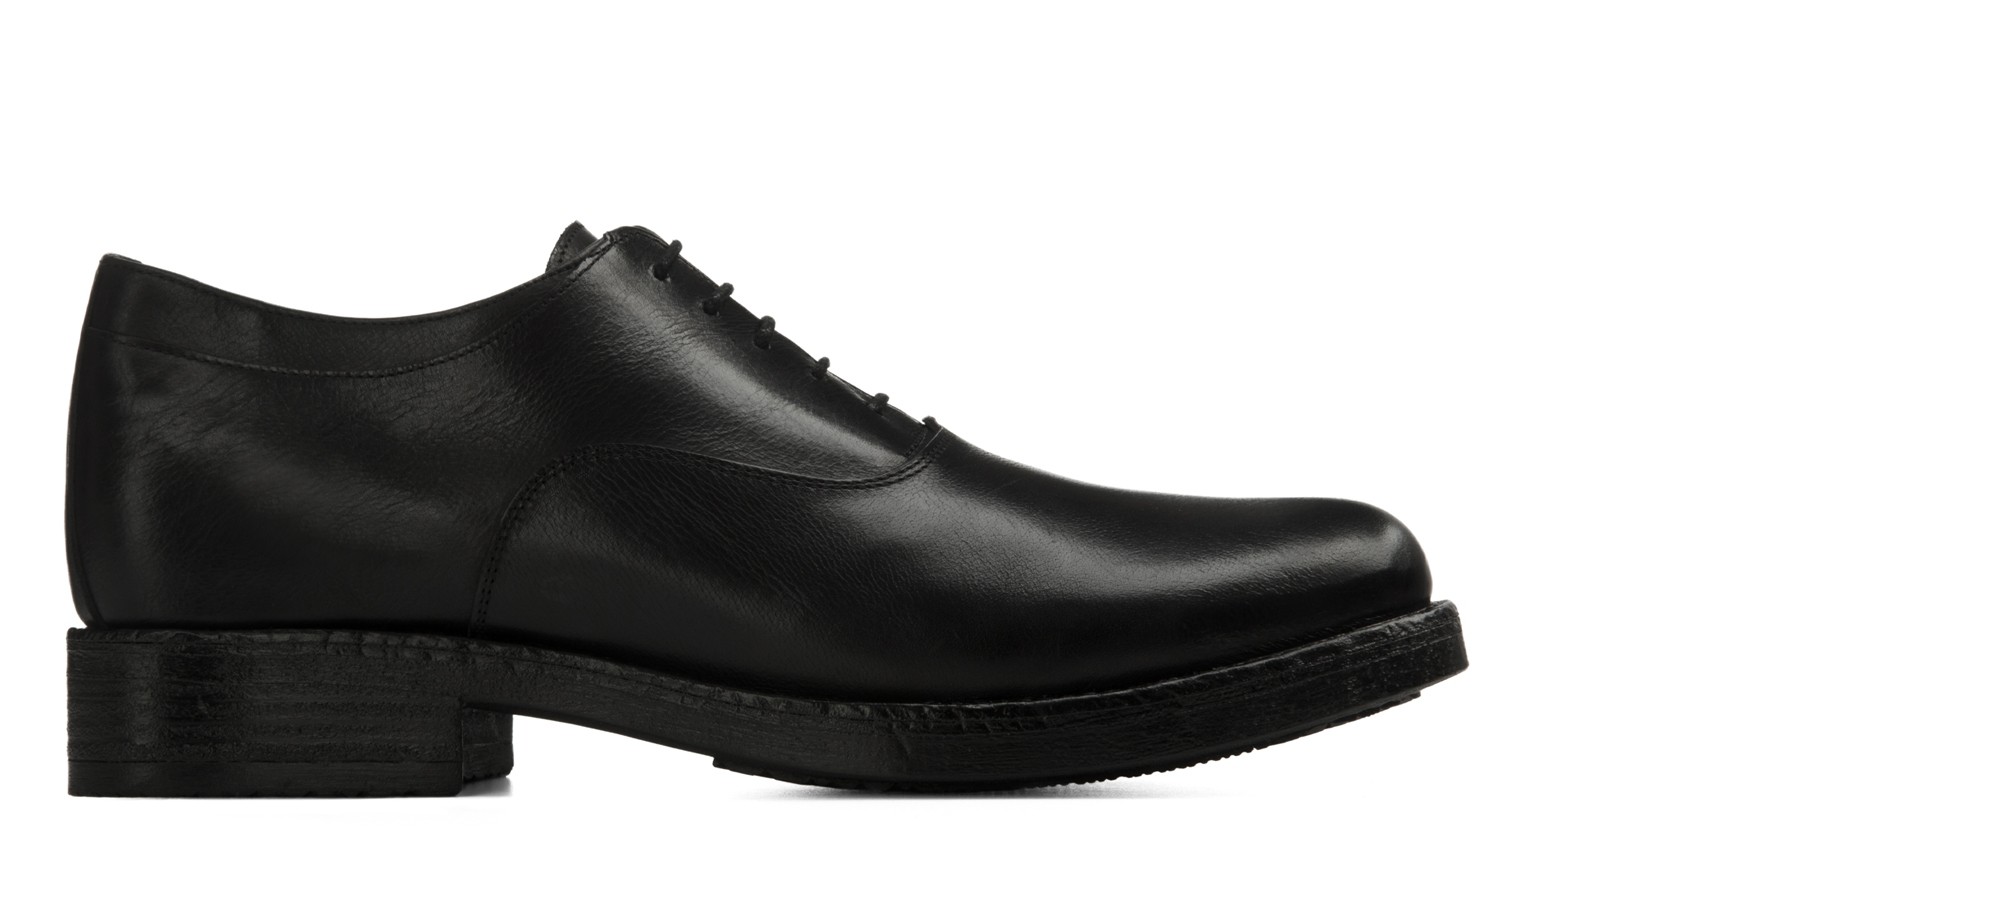 Kochi - Elevator Dress Shoes in Full Grain Leather from 2.4 to 3.1 inches